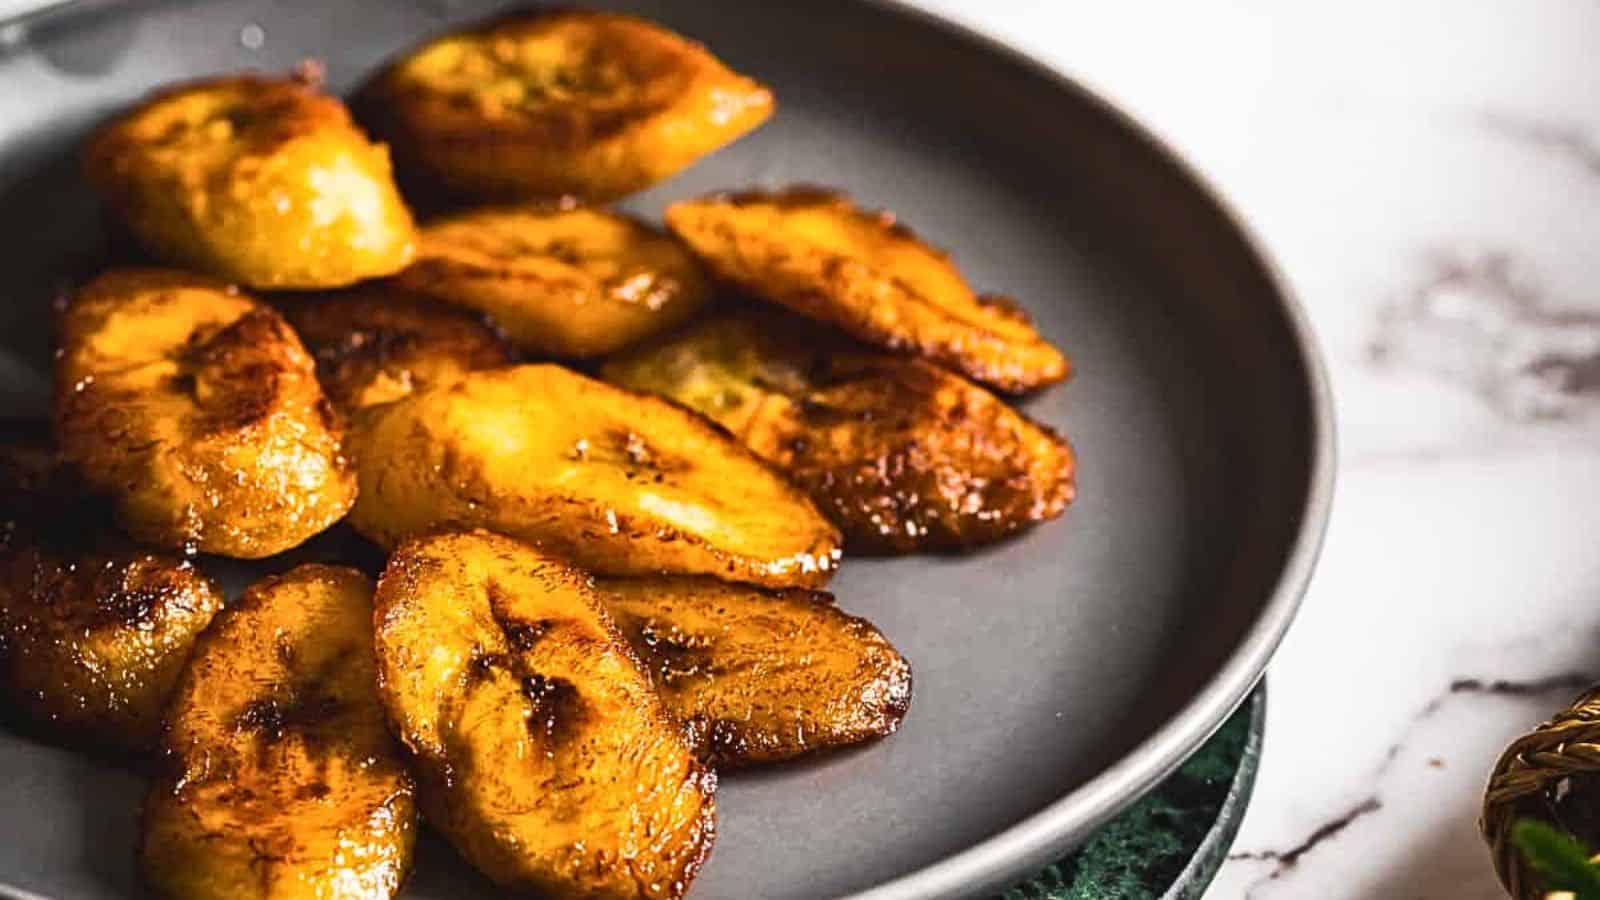 A plate of fried bananas on a marble table.